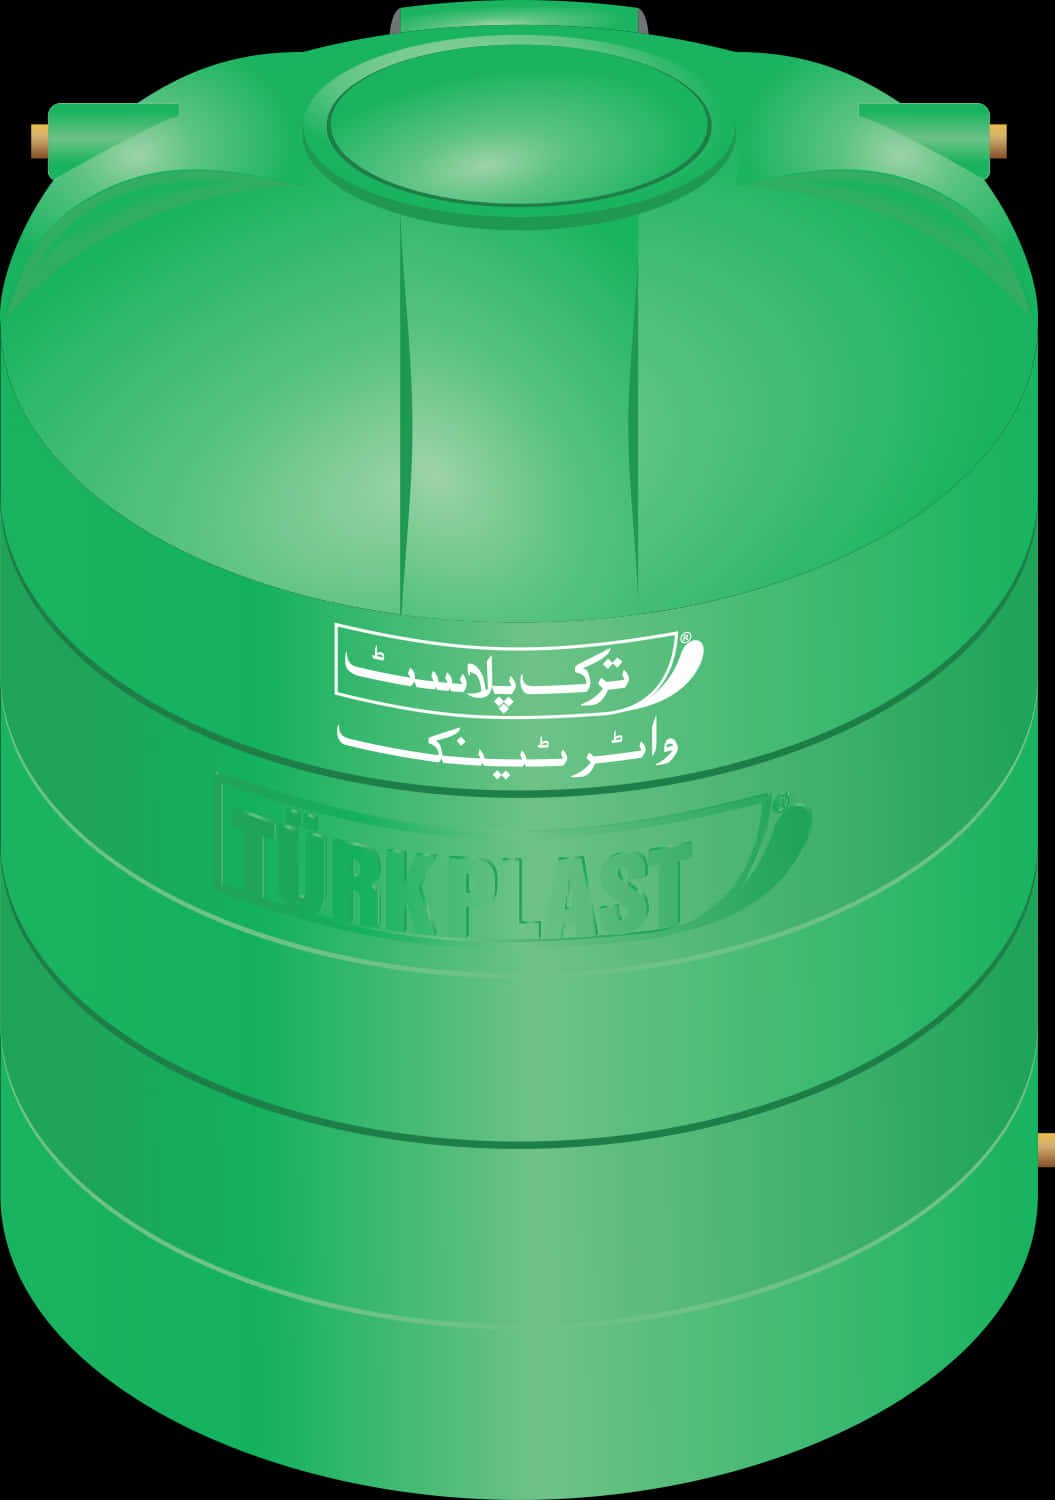 A Green Plastic Container With White Text